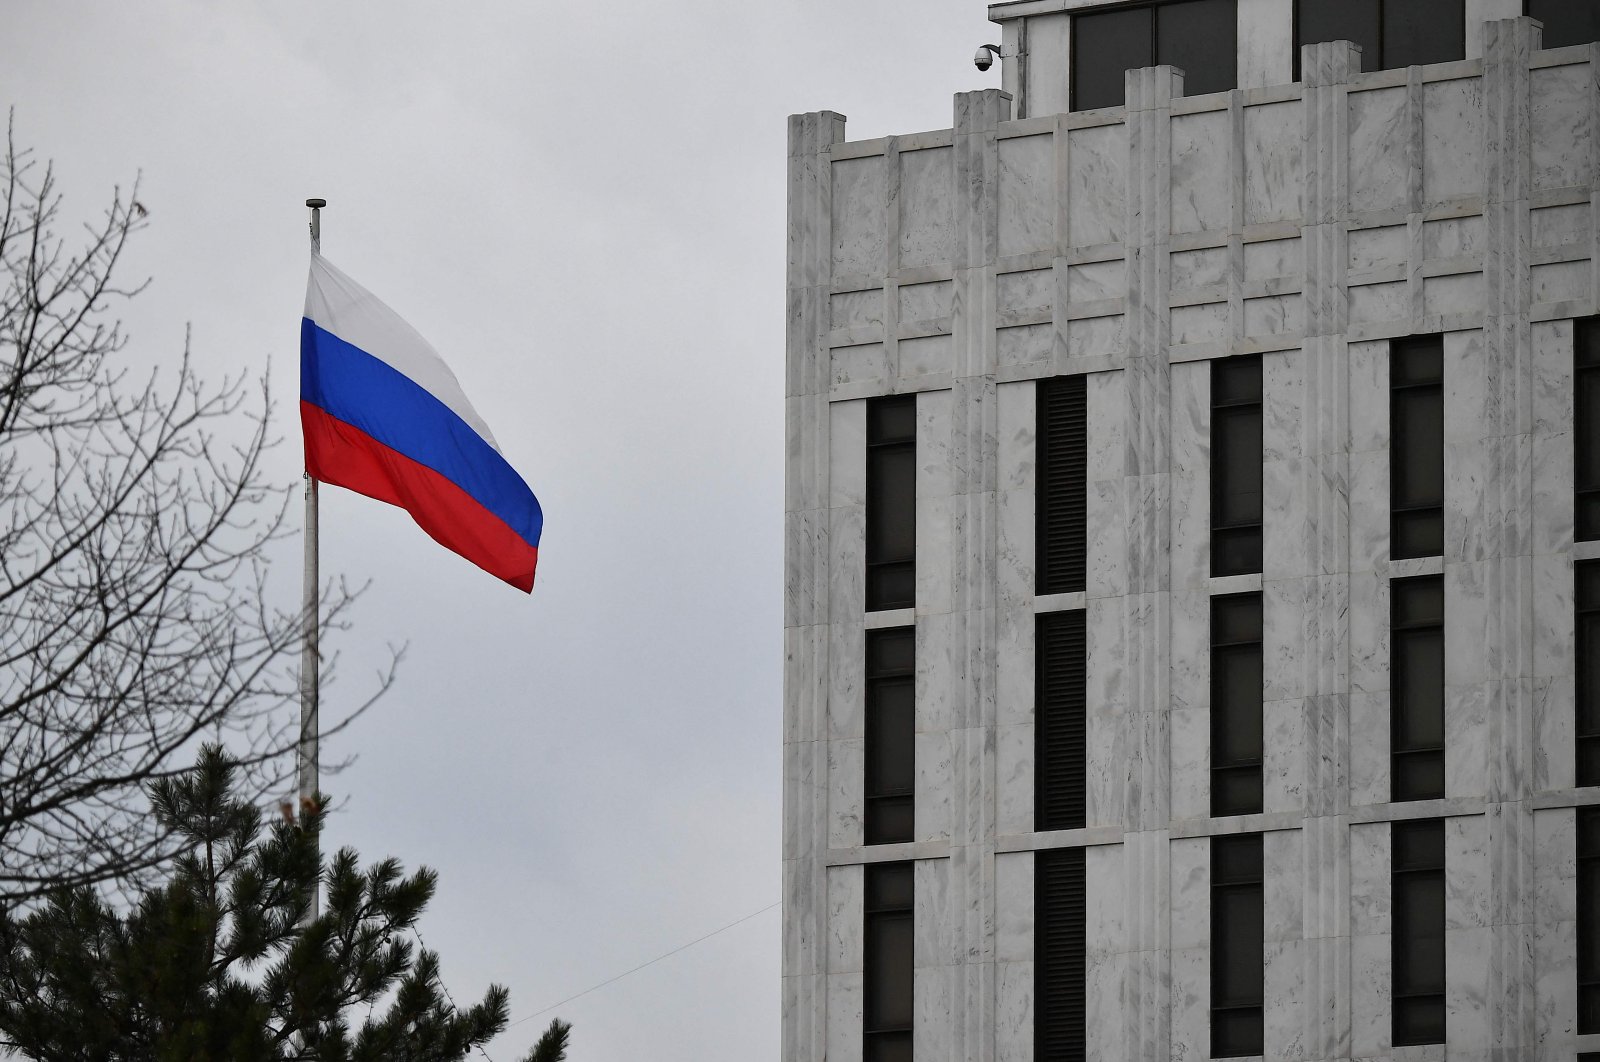 A Russian flag flutters in front of the Russian Embassy in Washington D.C., U.S., Feb. 23, 2022. (AFP Photo)